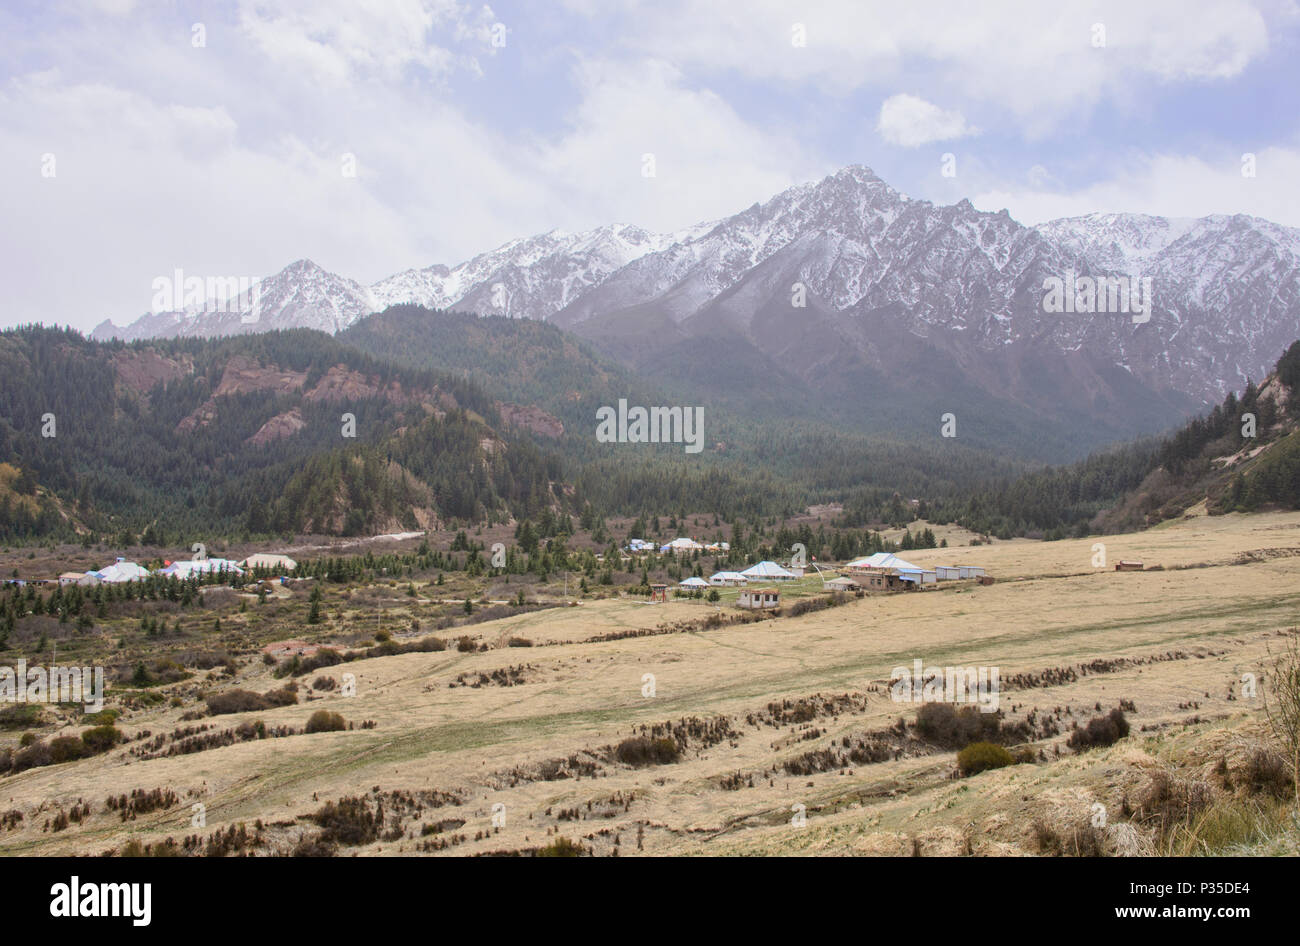 View of the Qilian Mountains from the Mati Si Temples, Gansu, China Stock Photo